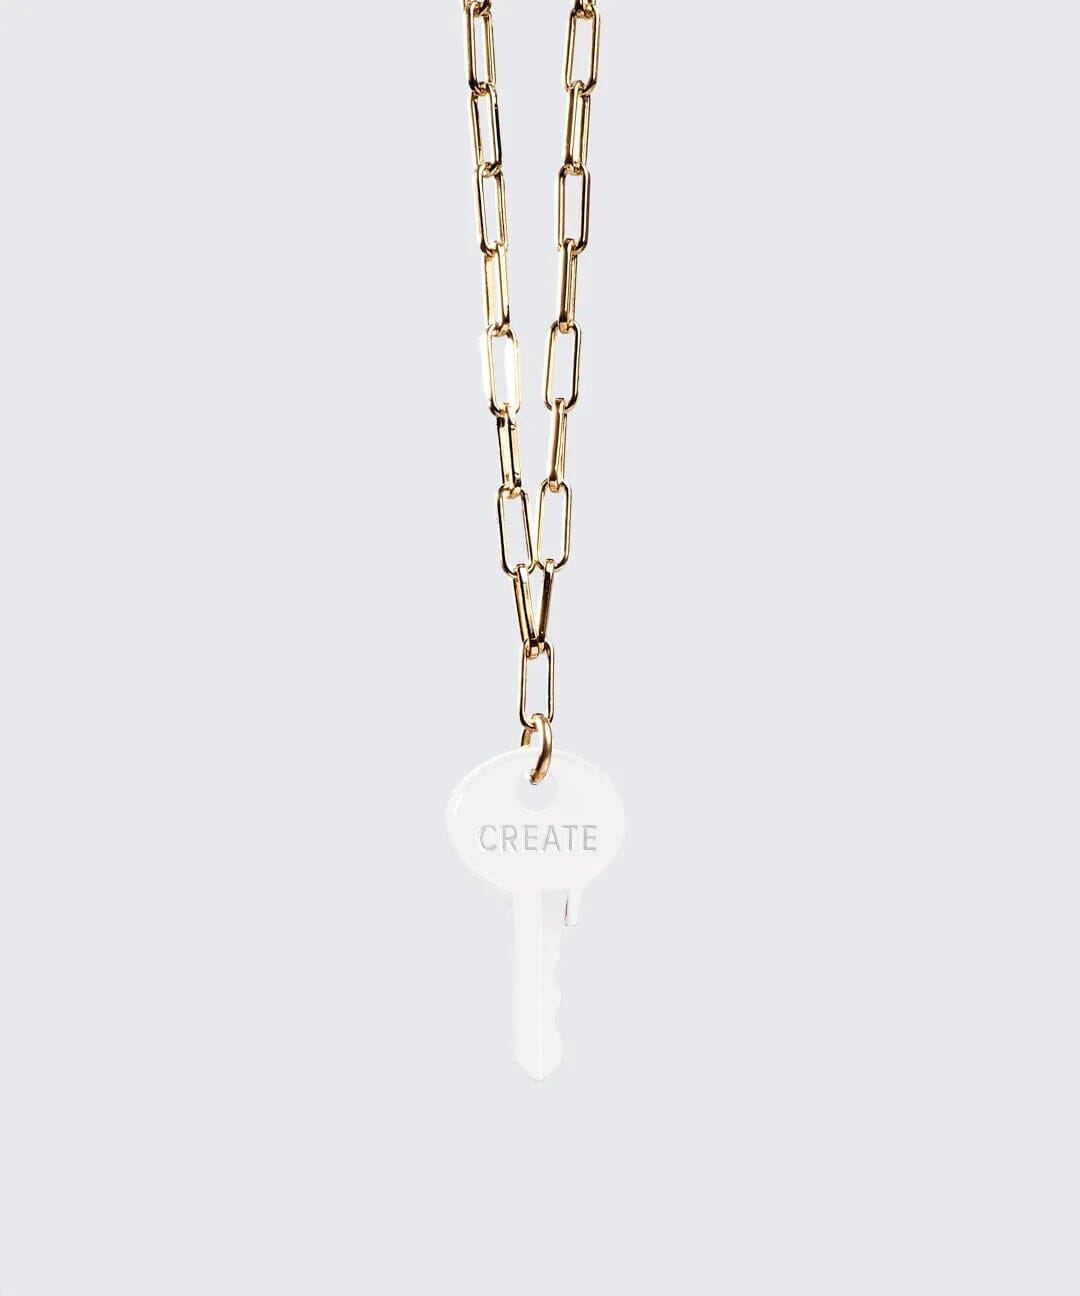 N - Glossy White Dainty Brooklyn Necklace Necklaces The Giving Keys 